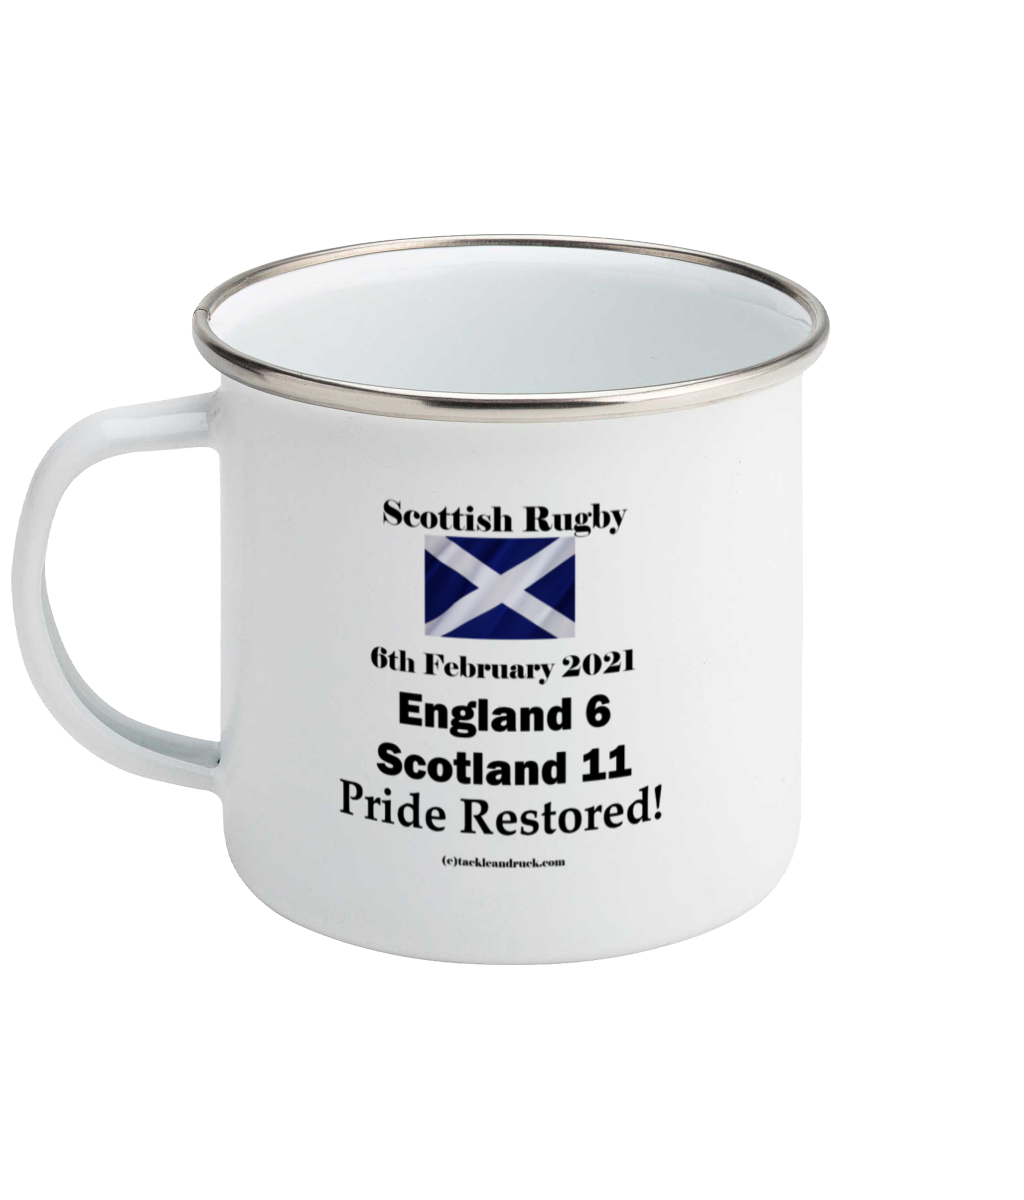 Tackle and Ruck - Scottish Rugby Mugs Gifts - Calcutta Cup 2021 Win - Pride Restored